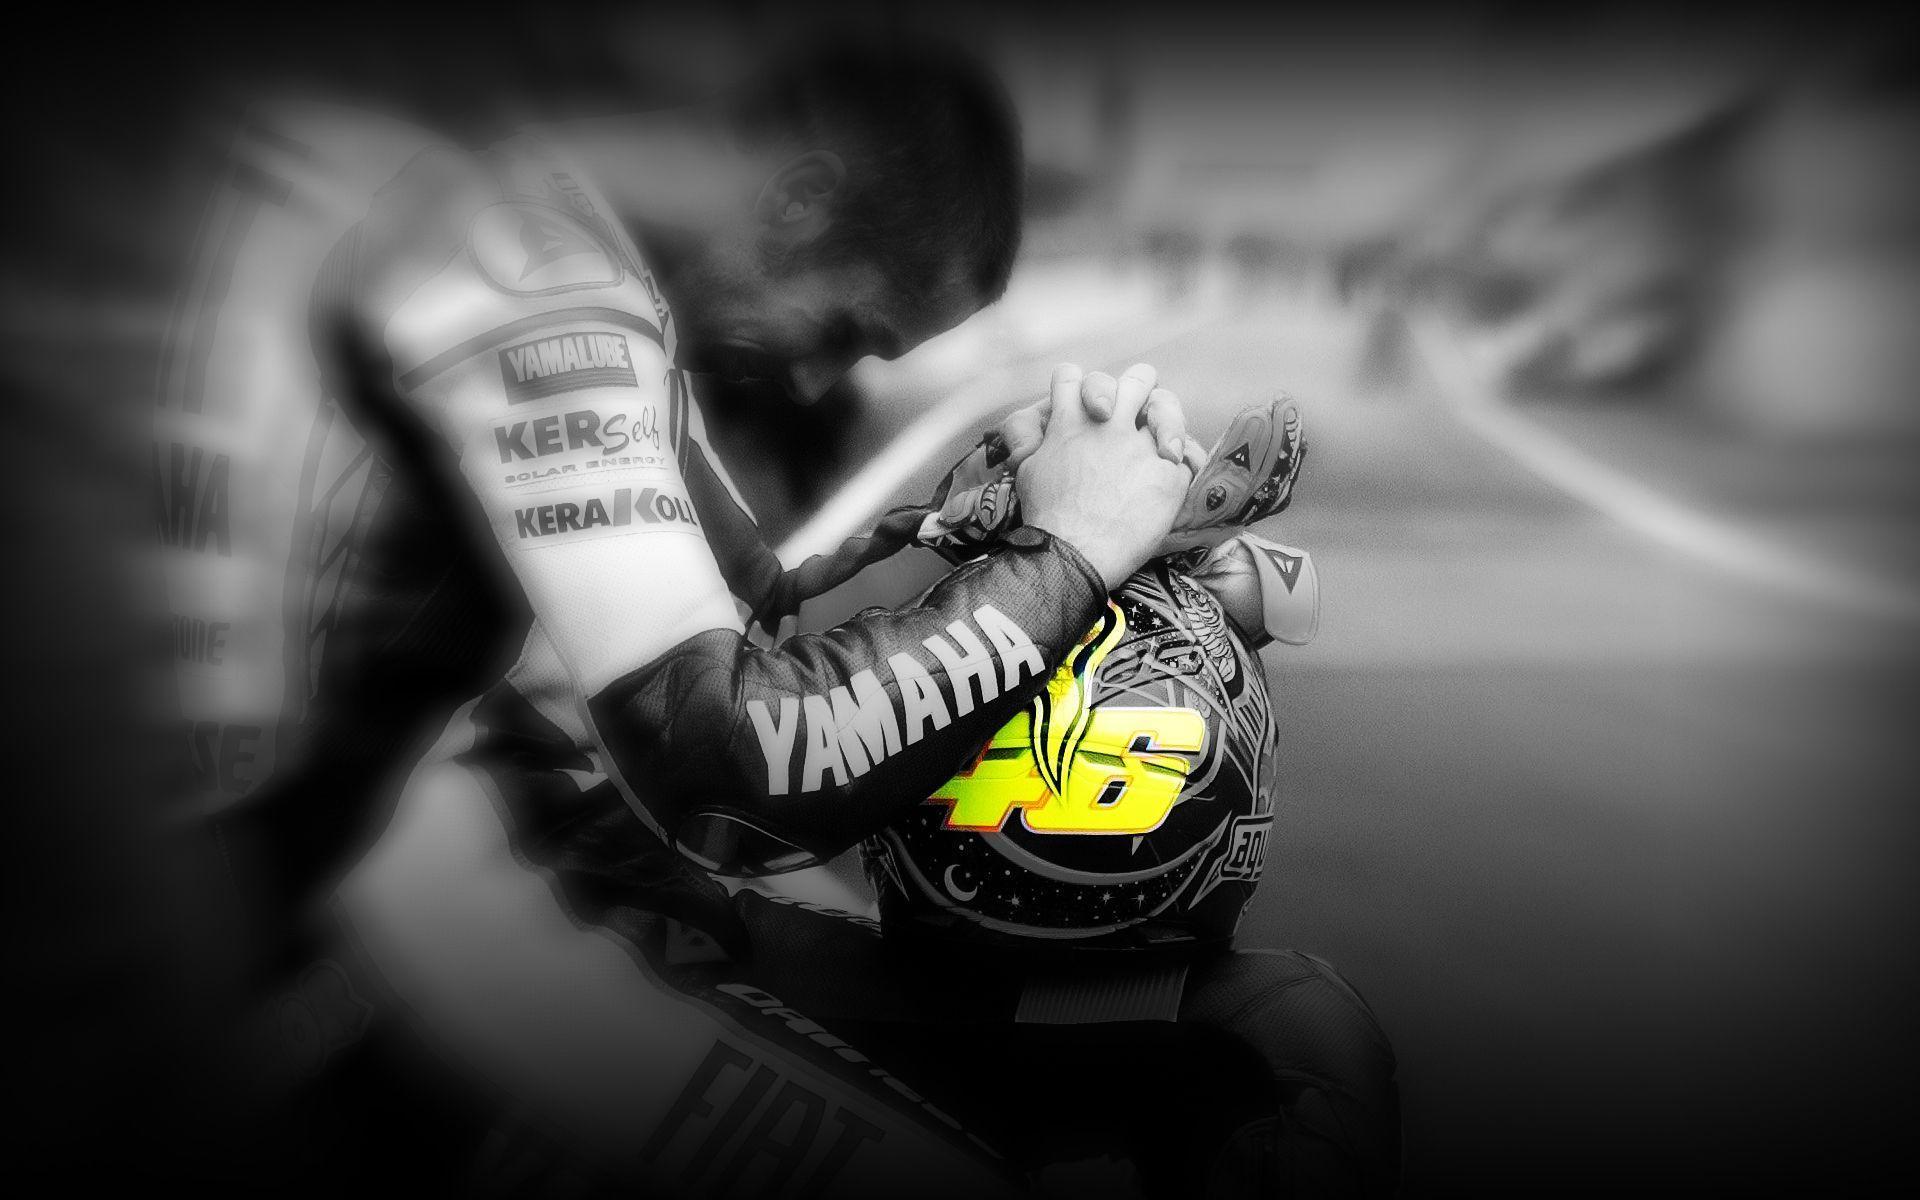 Collection of Valentino Rossi Wallpaper on HDWallpaper